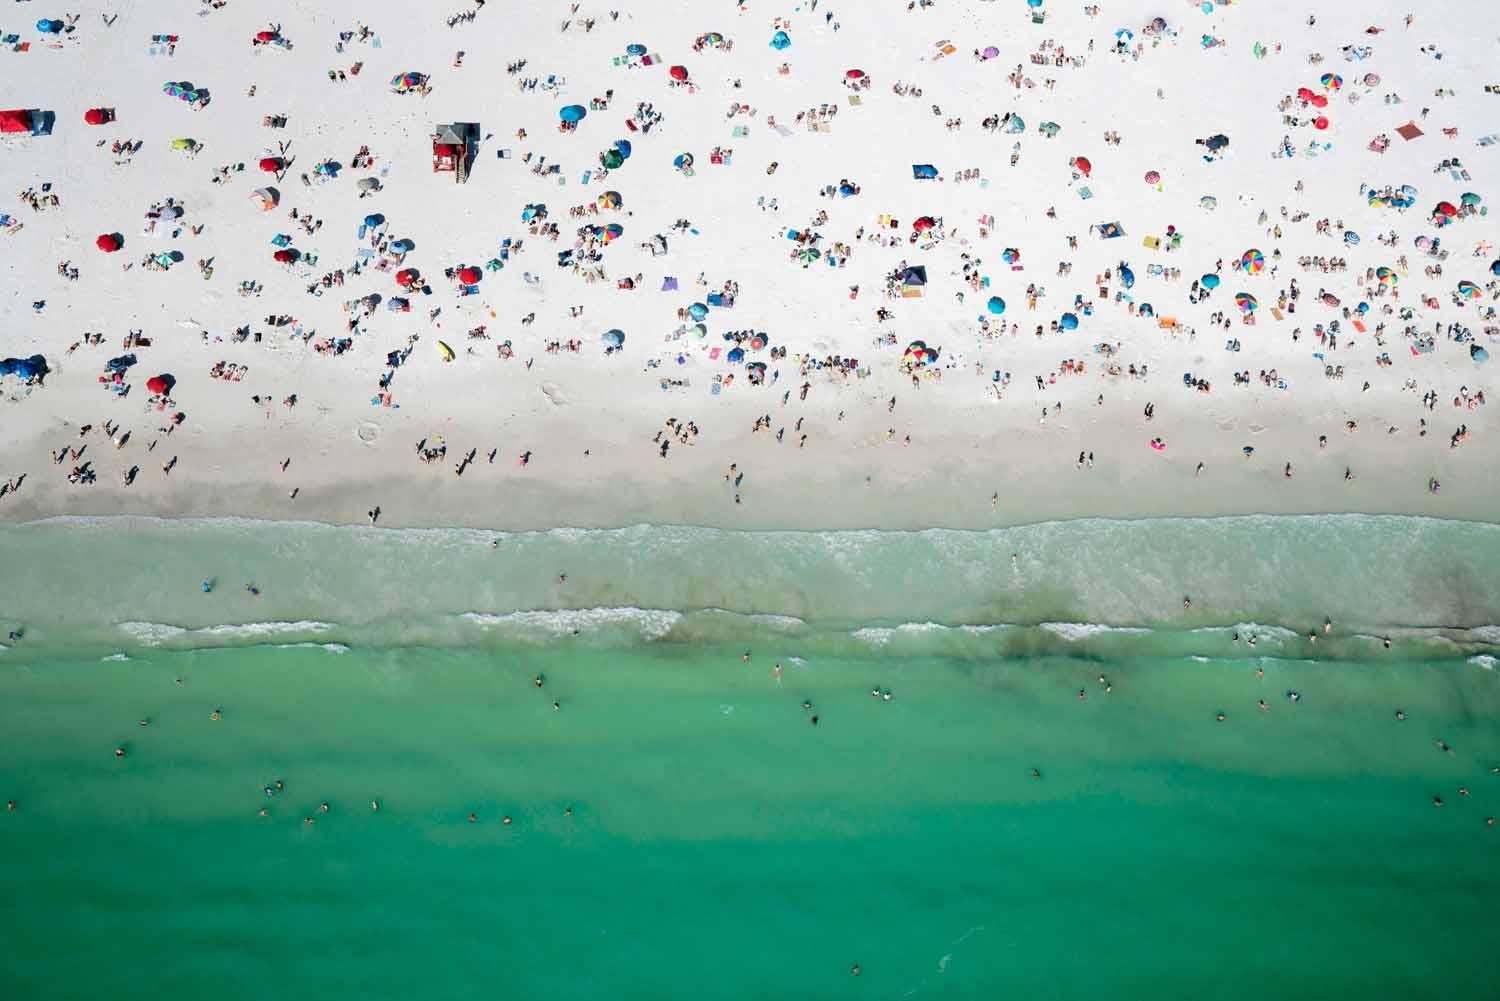 Dinesh Boaz Color Photograph - All The People, Siesta Key, Florida, 2018